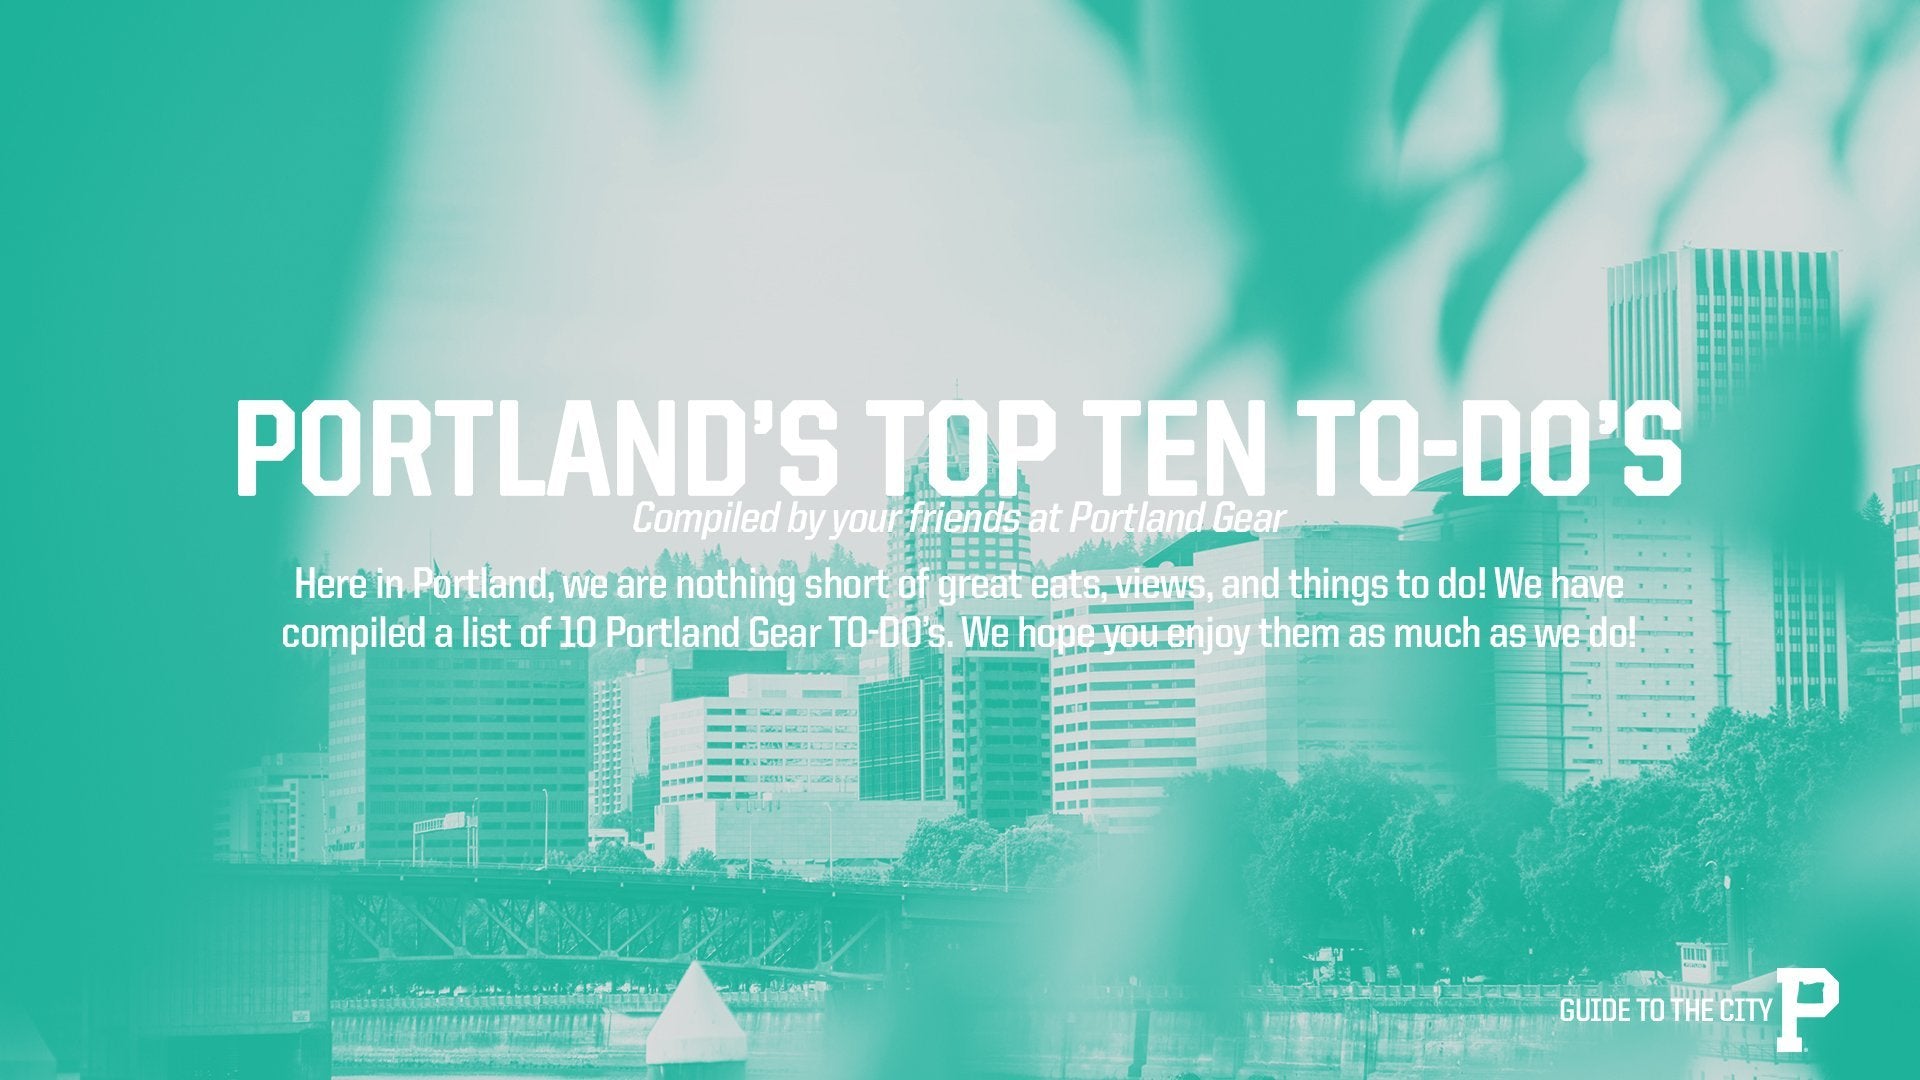 Guide to the City - Portland Gear